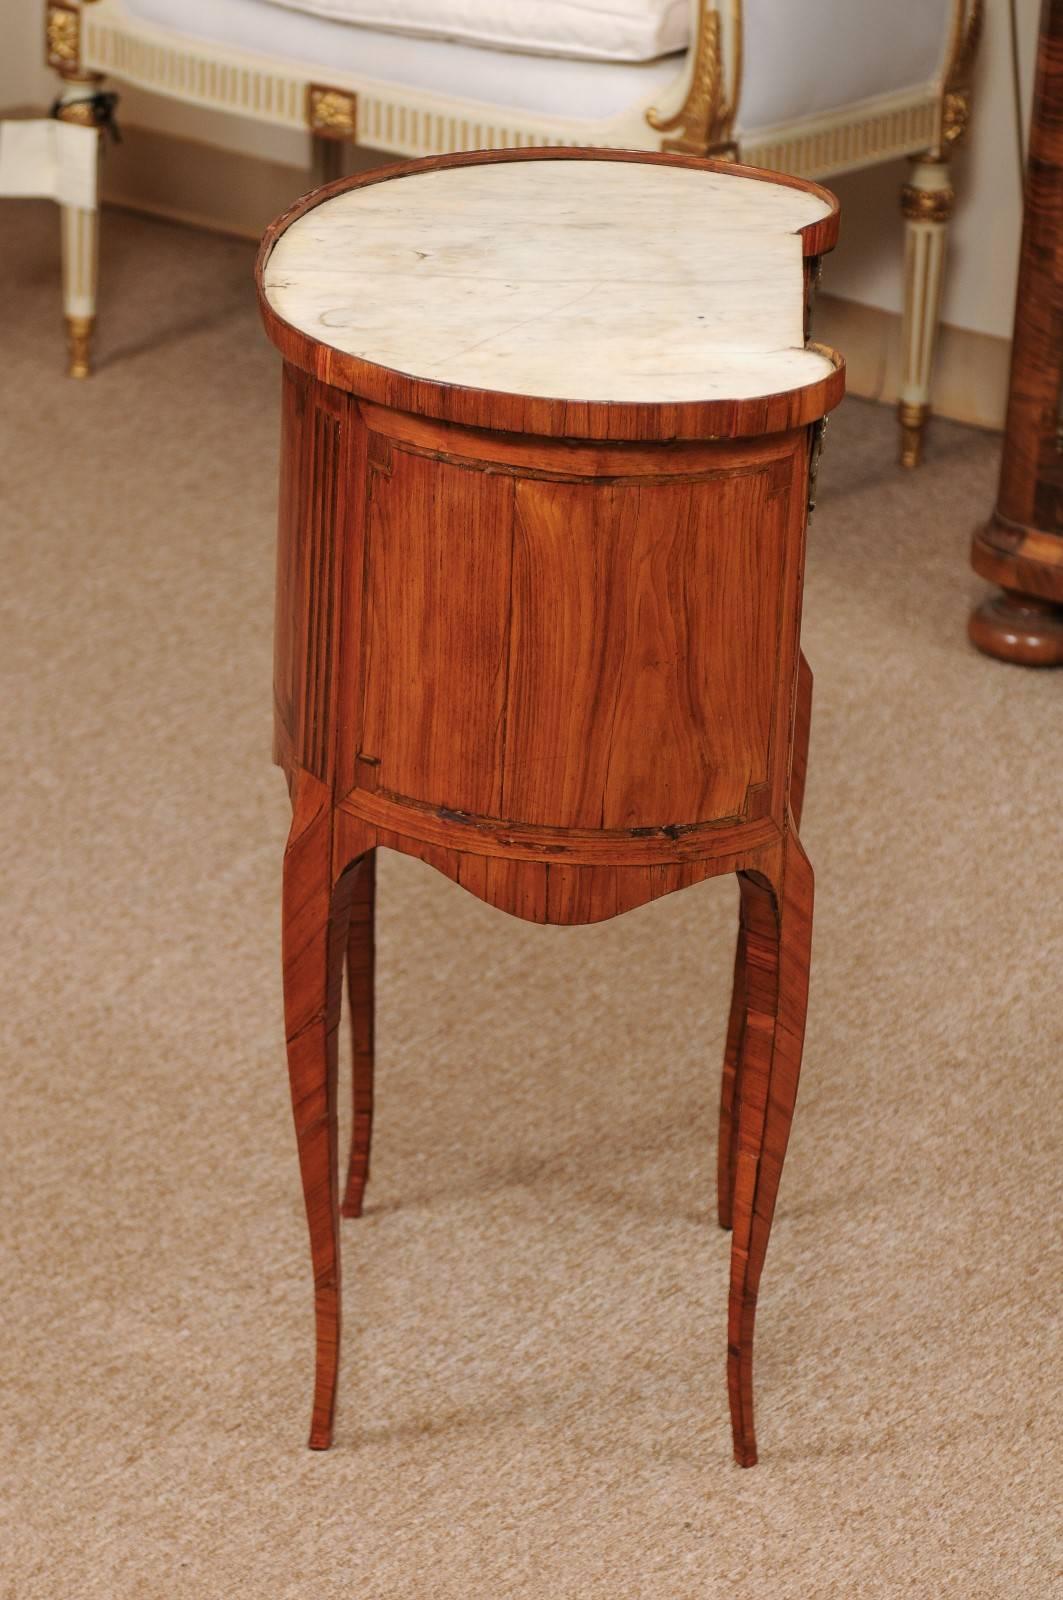 18th Century French Louis XVI Period Kidney Shaped Tulipwood Table with Marble For Sale 2